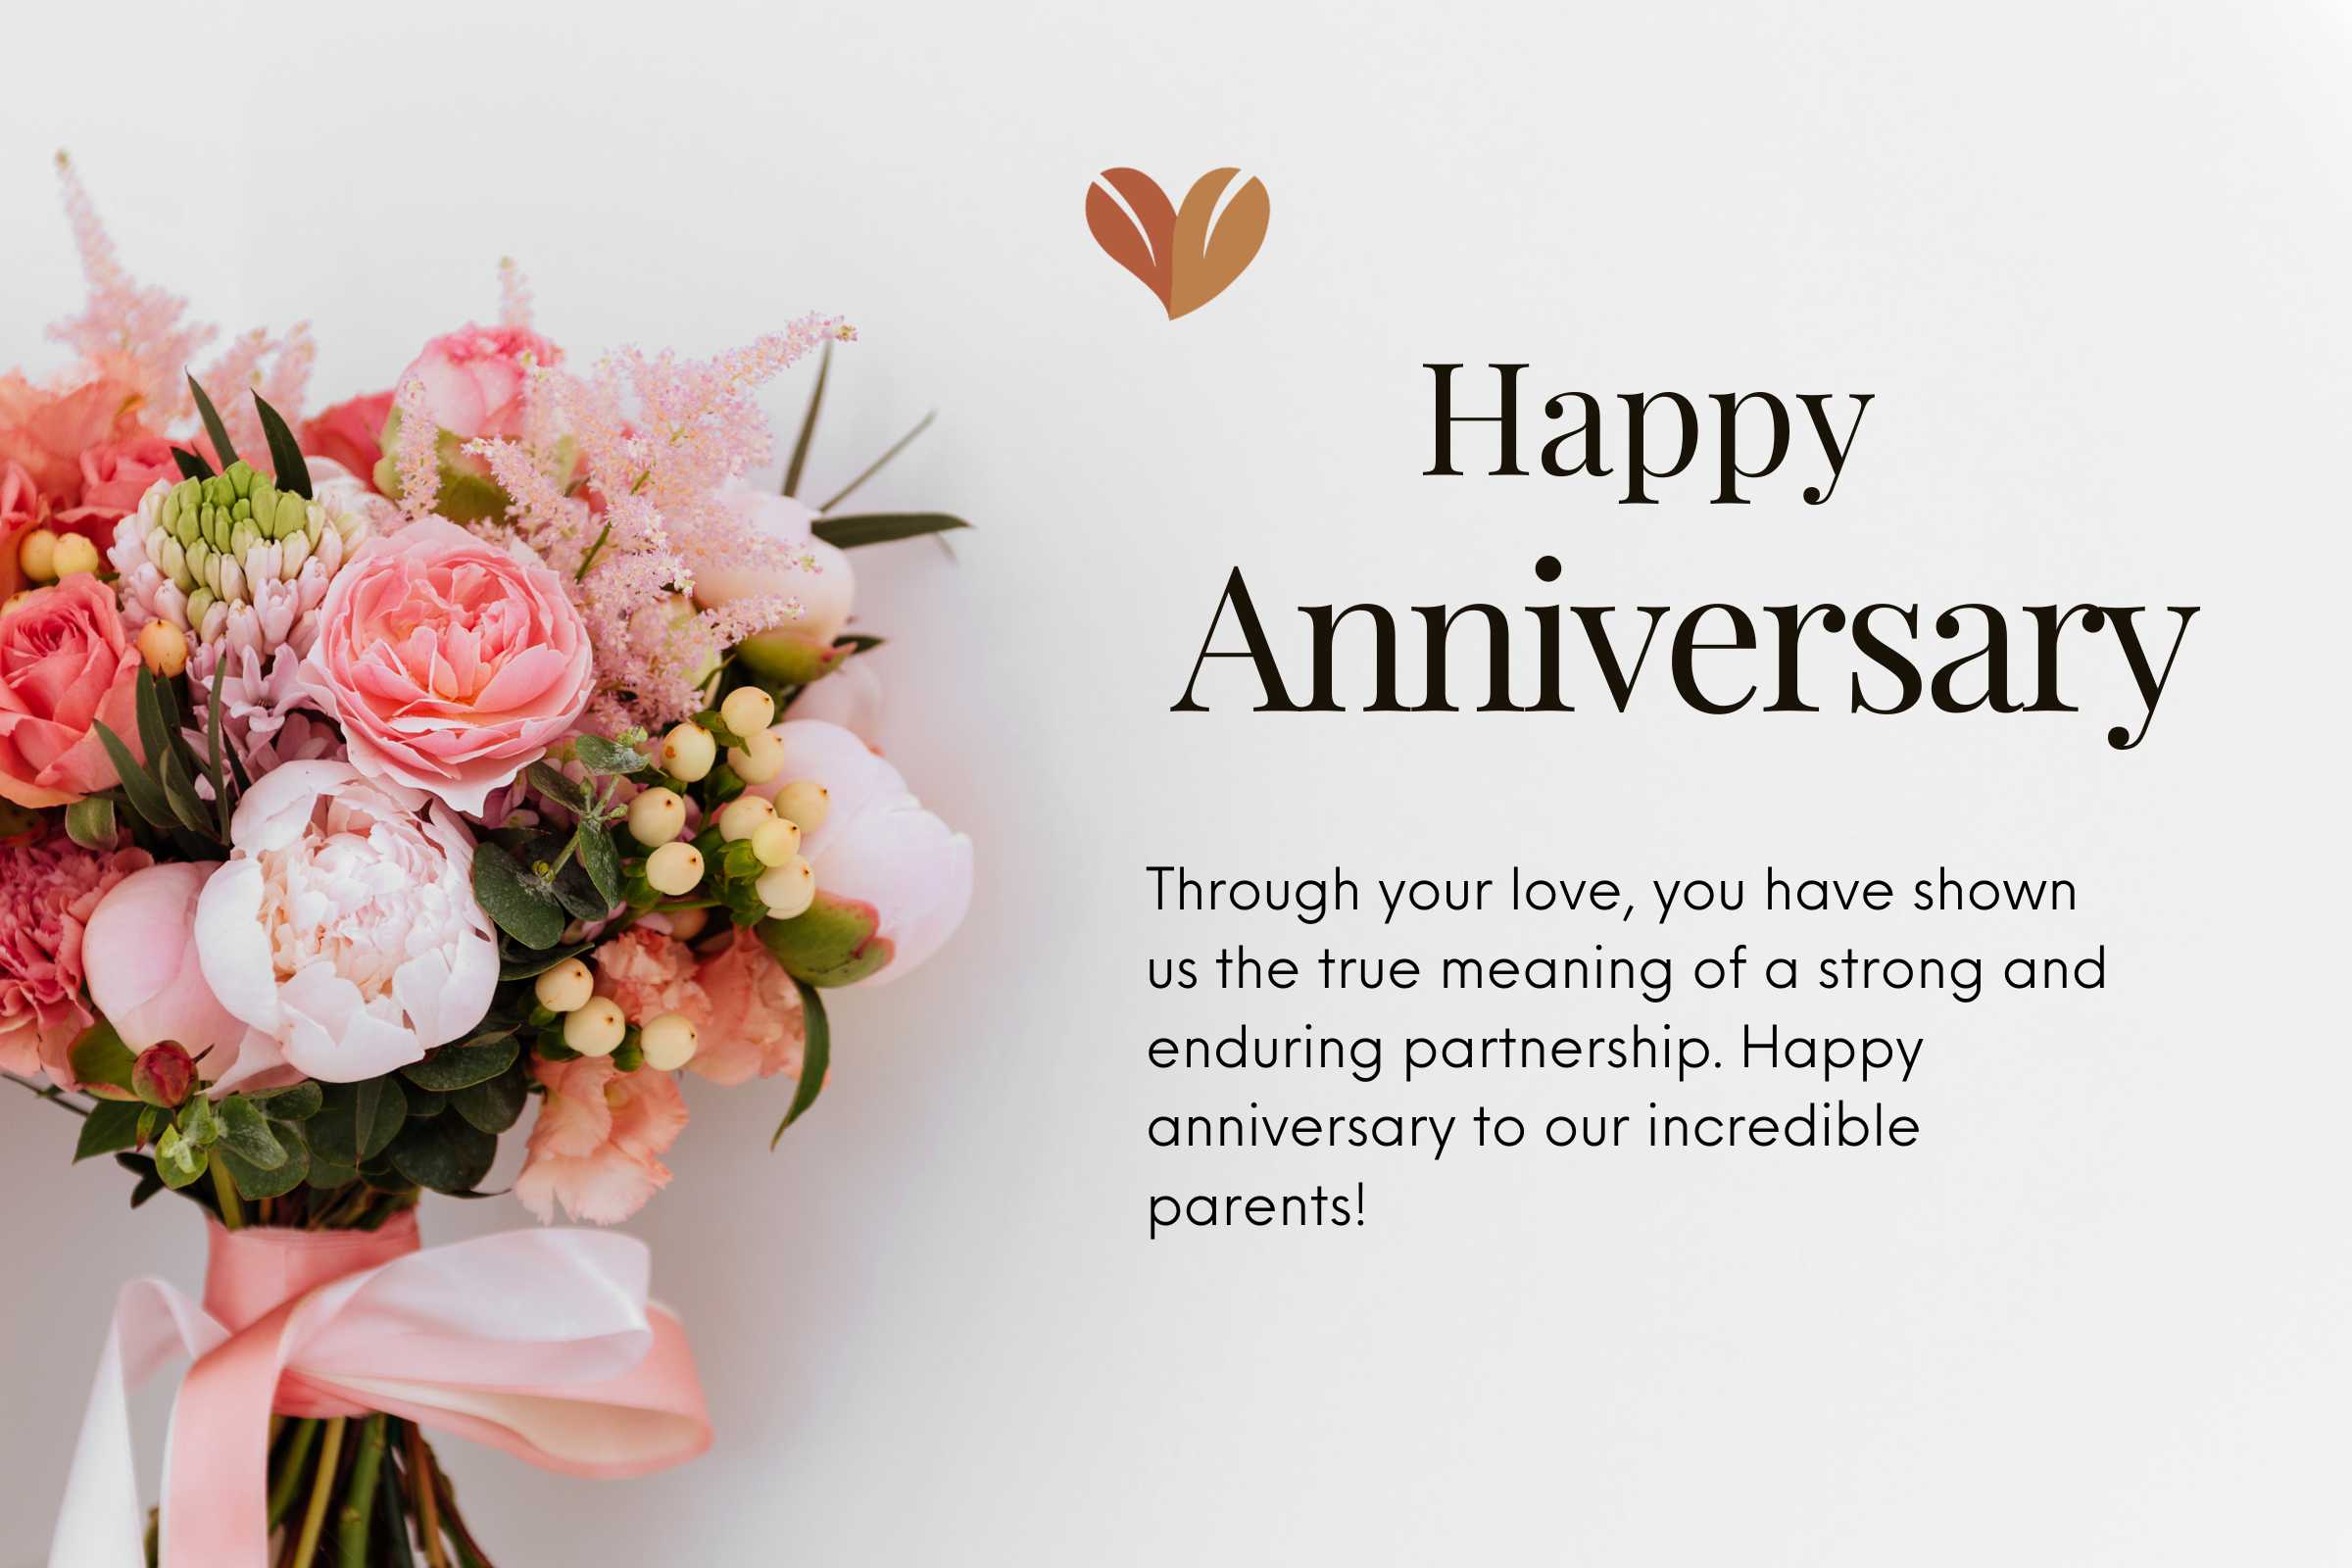 Celebrate the beautiful union of two souls - anniversary wishes for parents